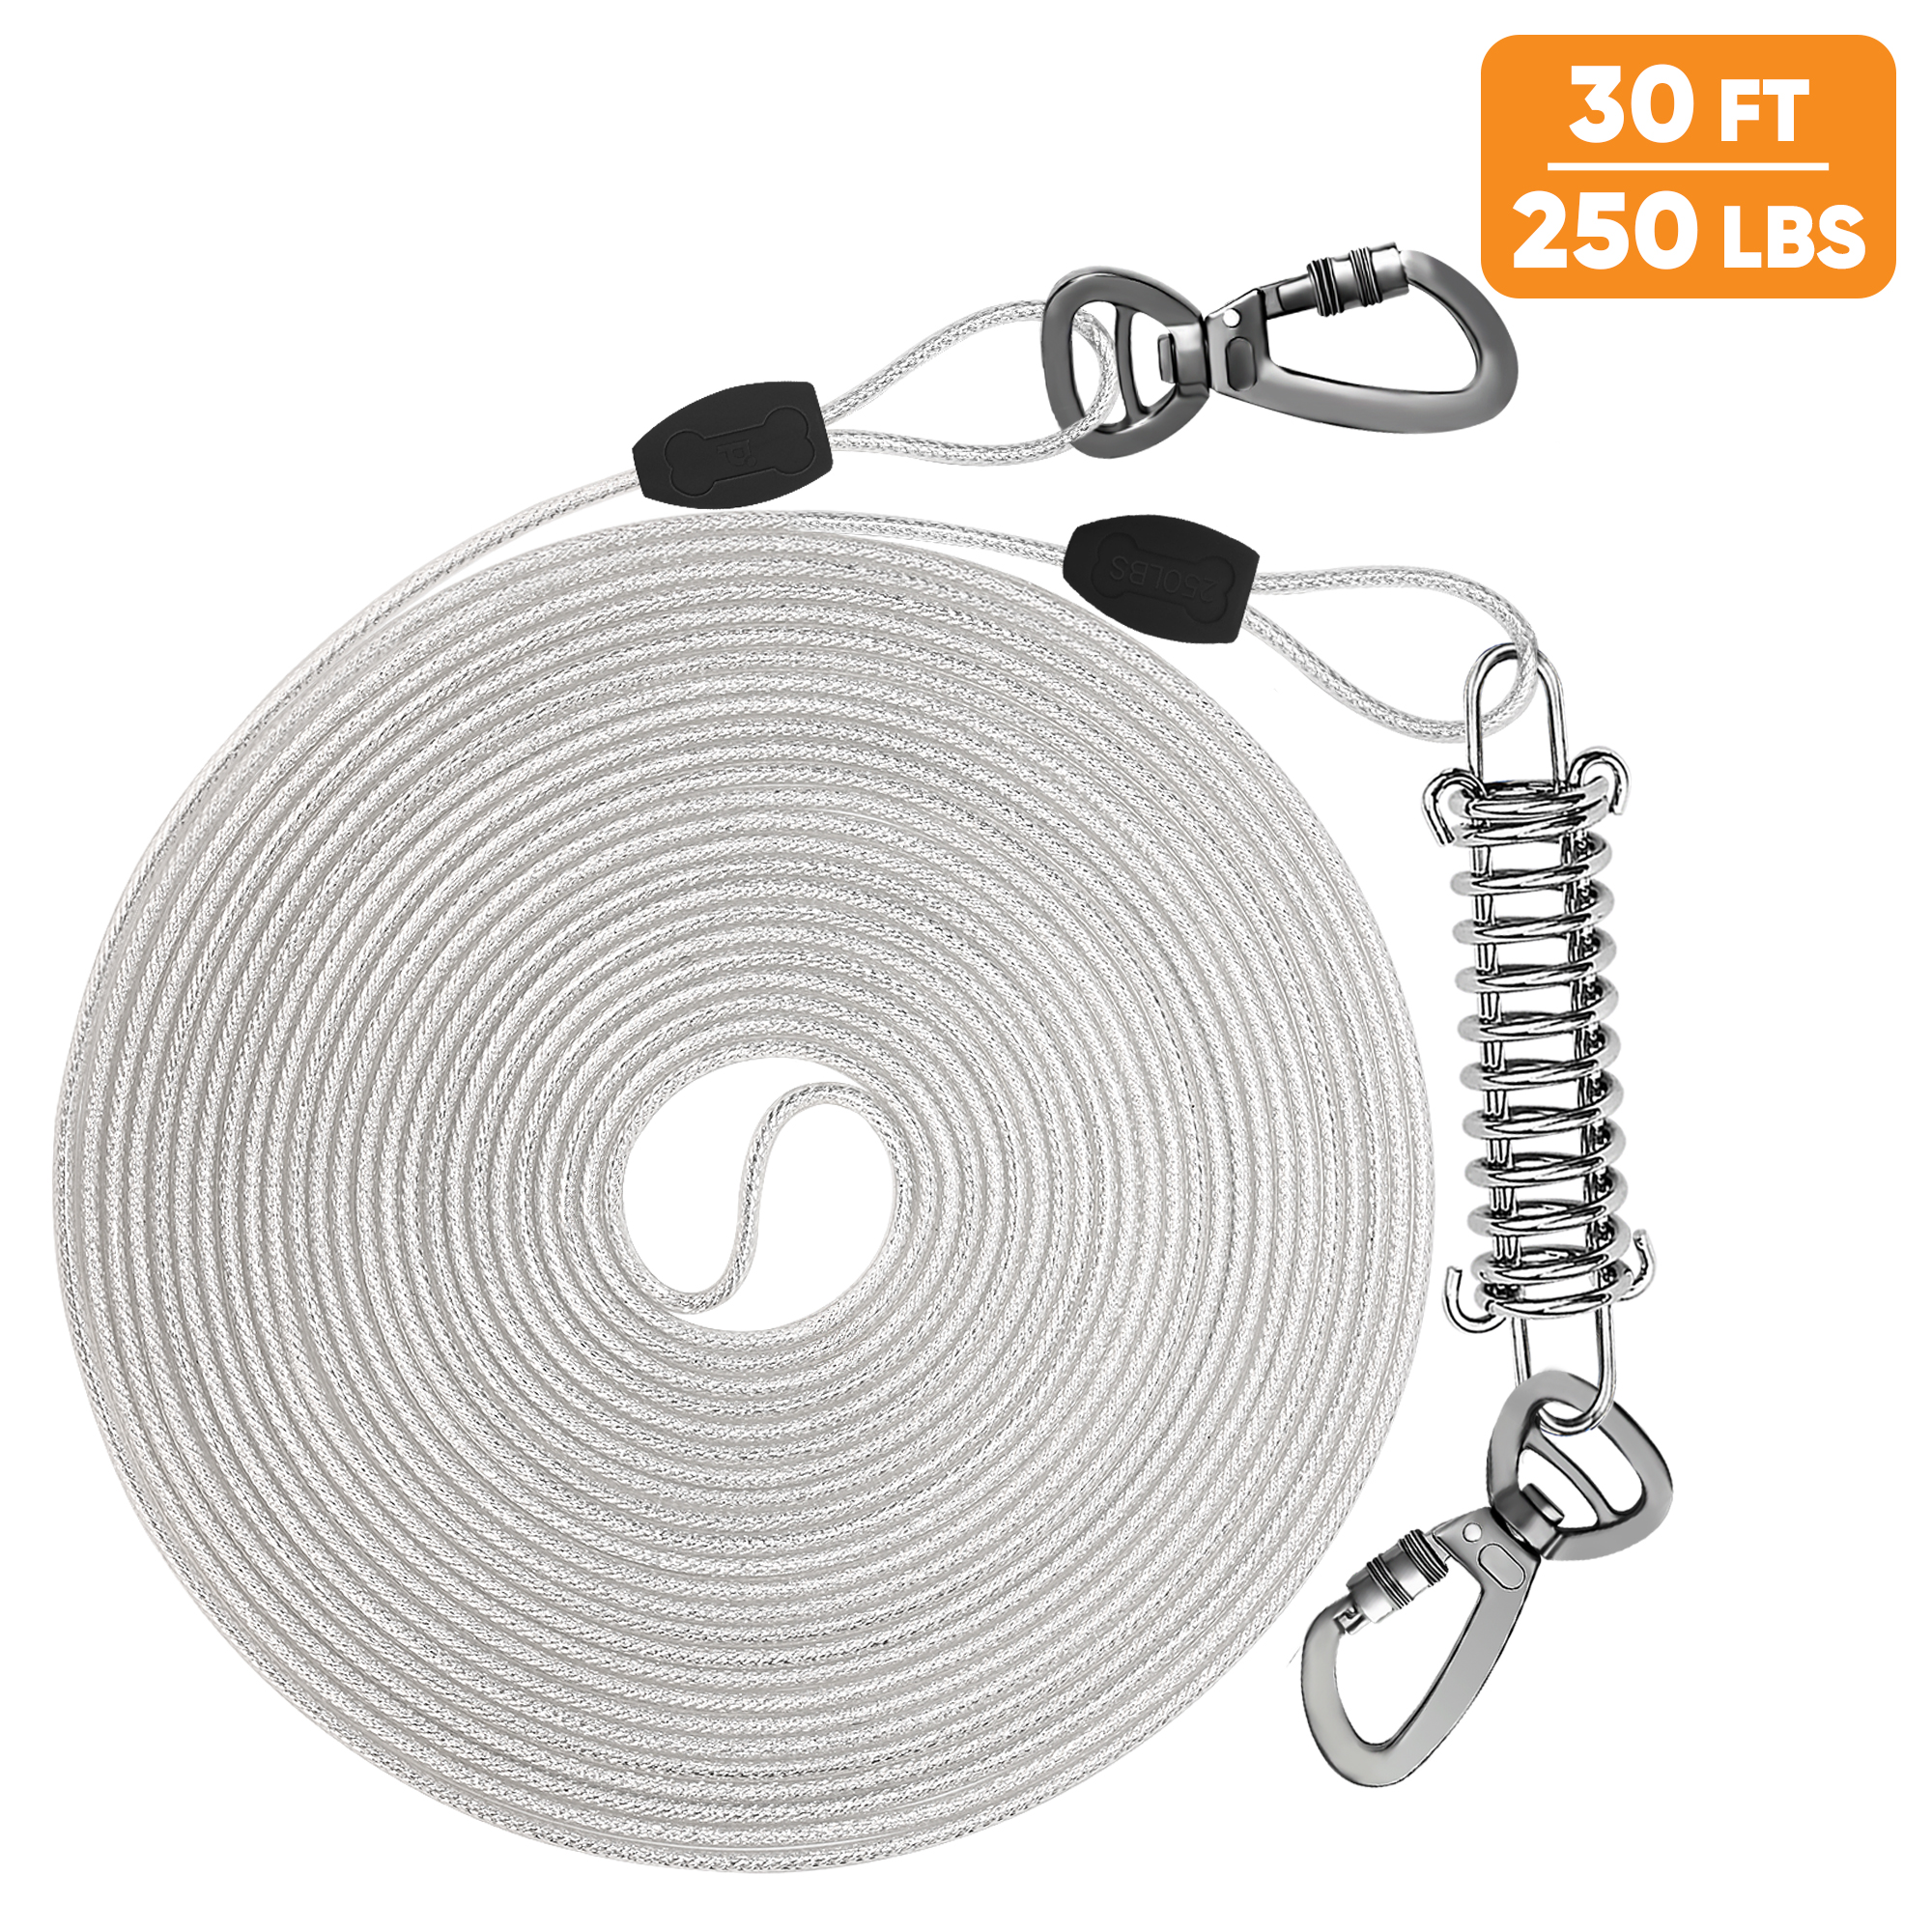 Reflective Silver Dog Tie-Out Cable